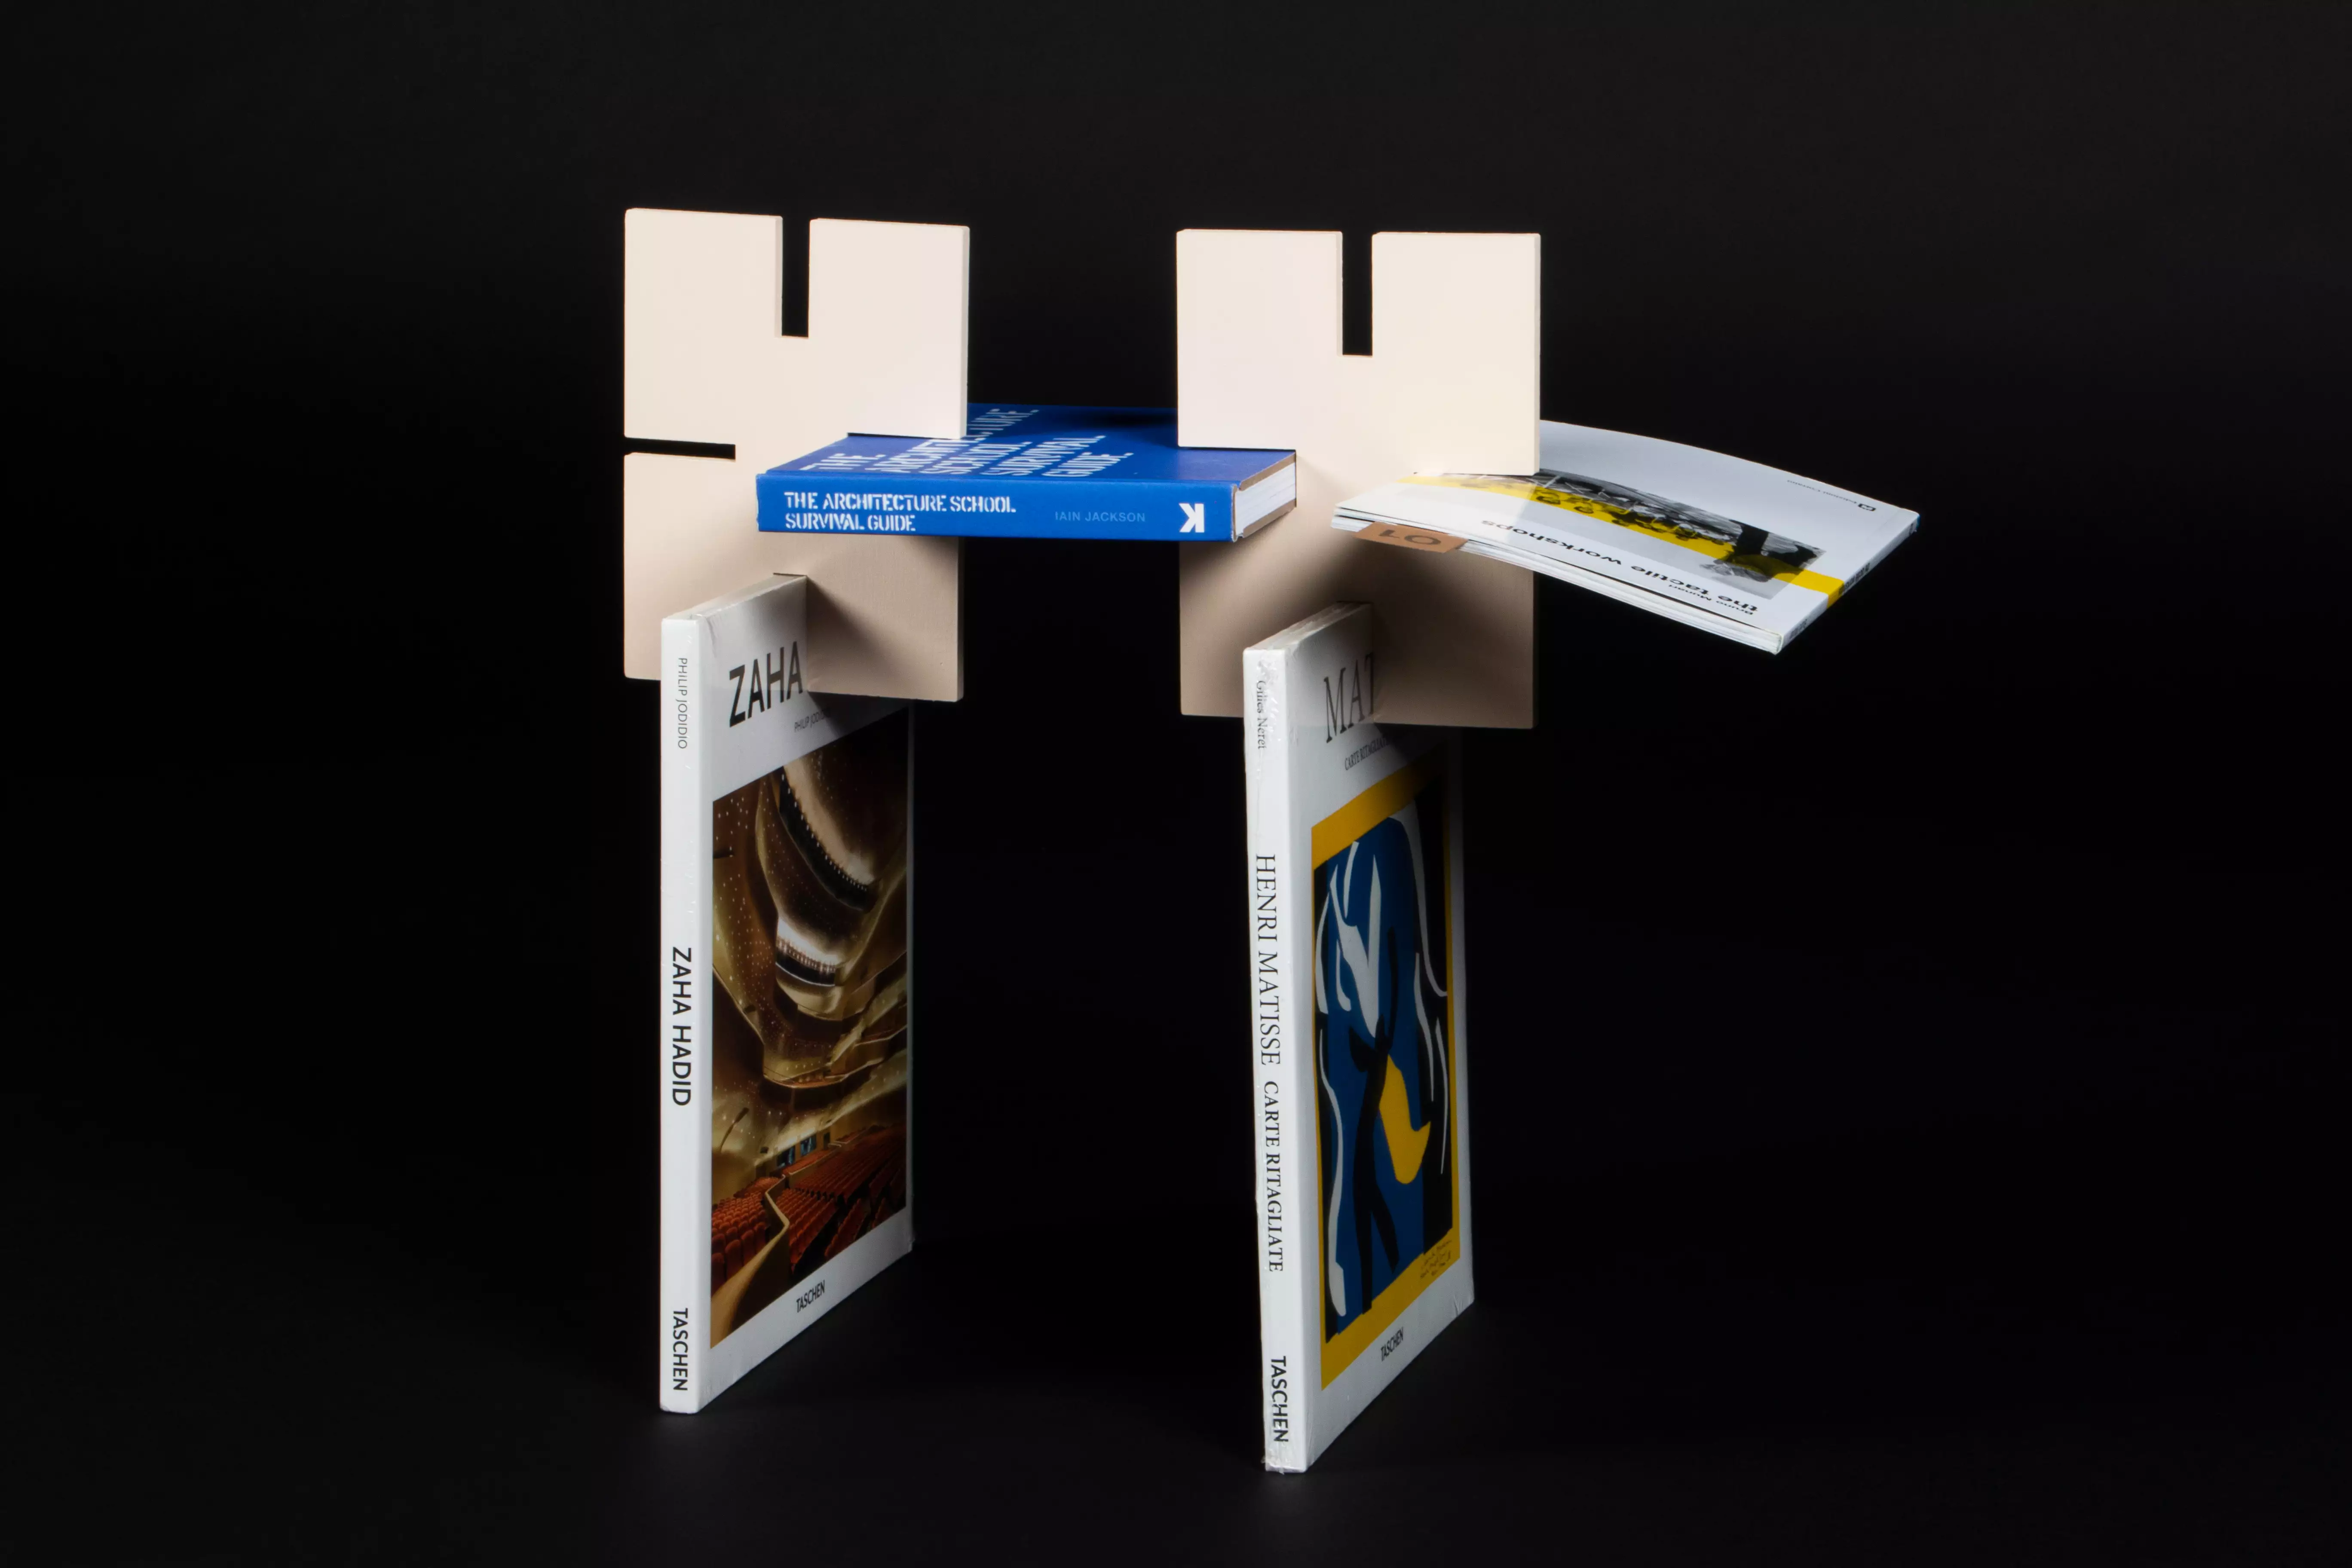 A bookshelf made up of pieces that connect books together to create structure.